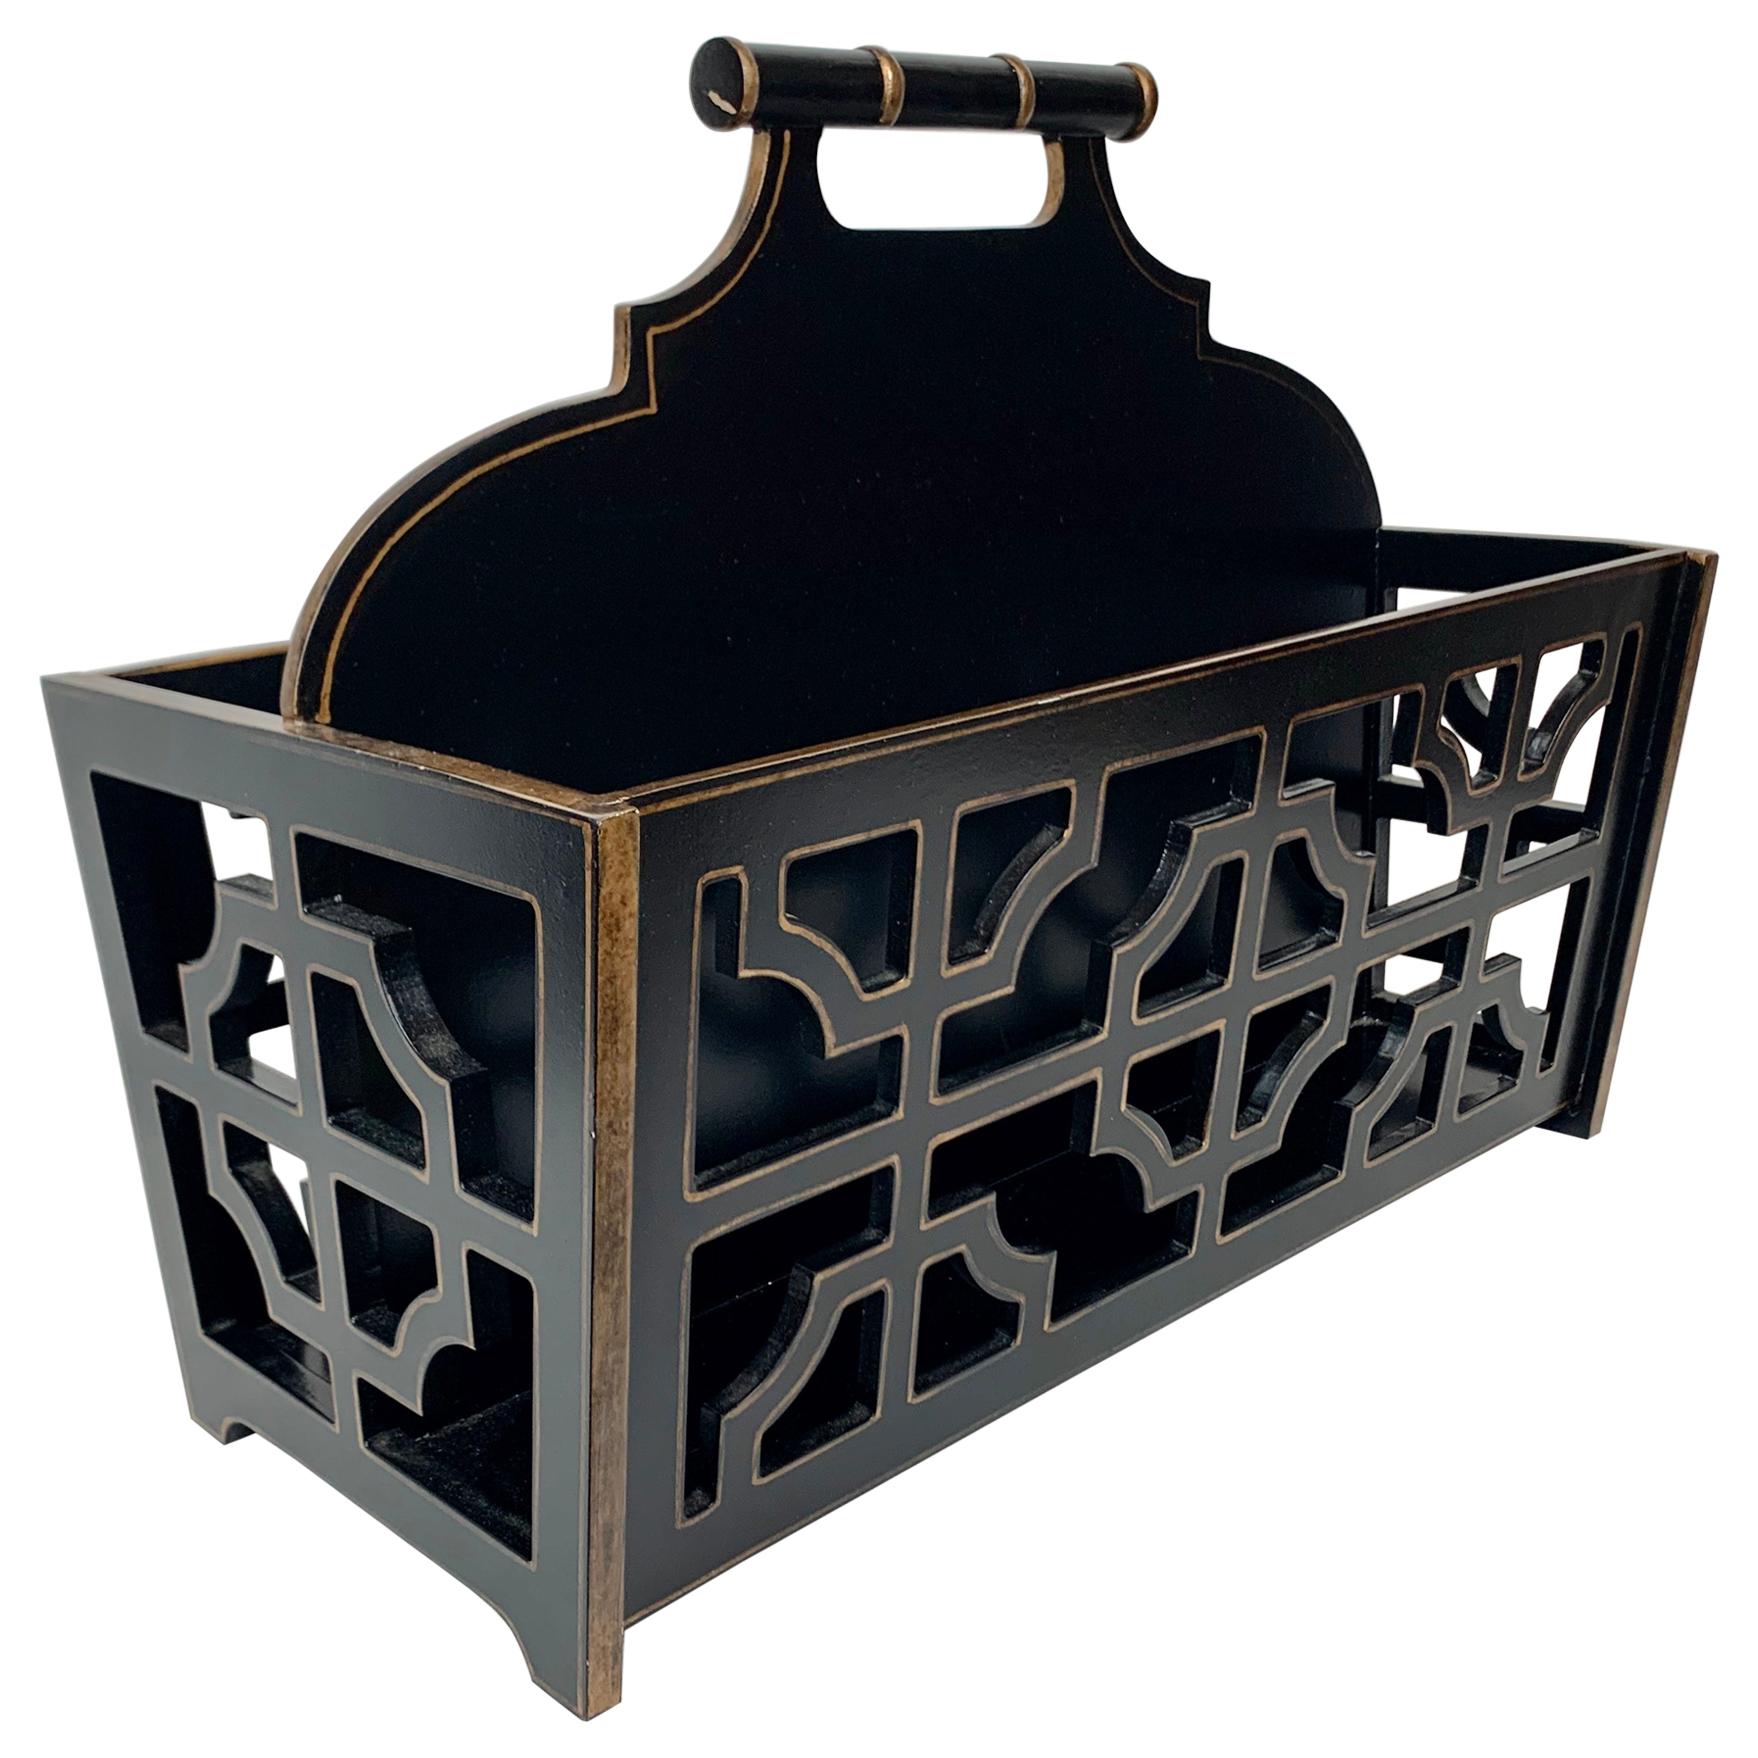 Faux Bamboo Handled Magazine Holder in Black with Gilt Edging and Fret Work 